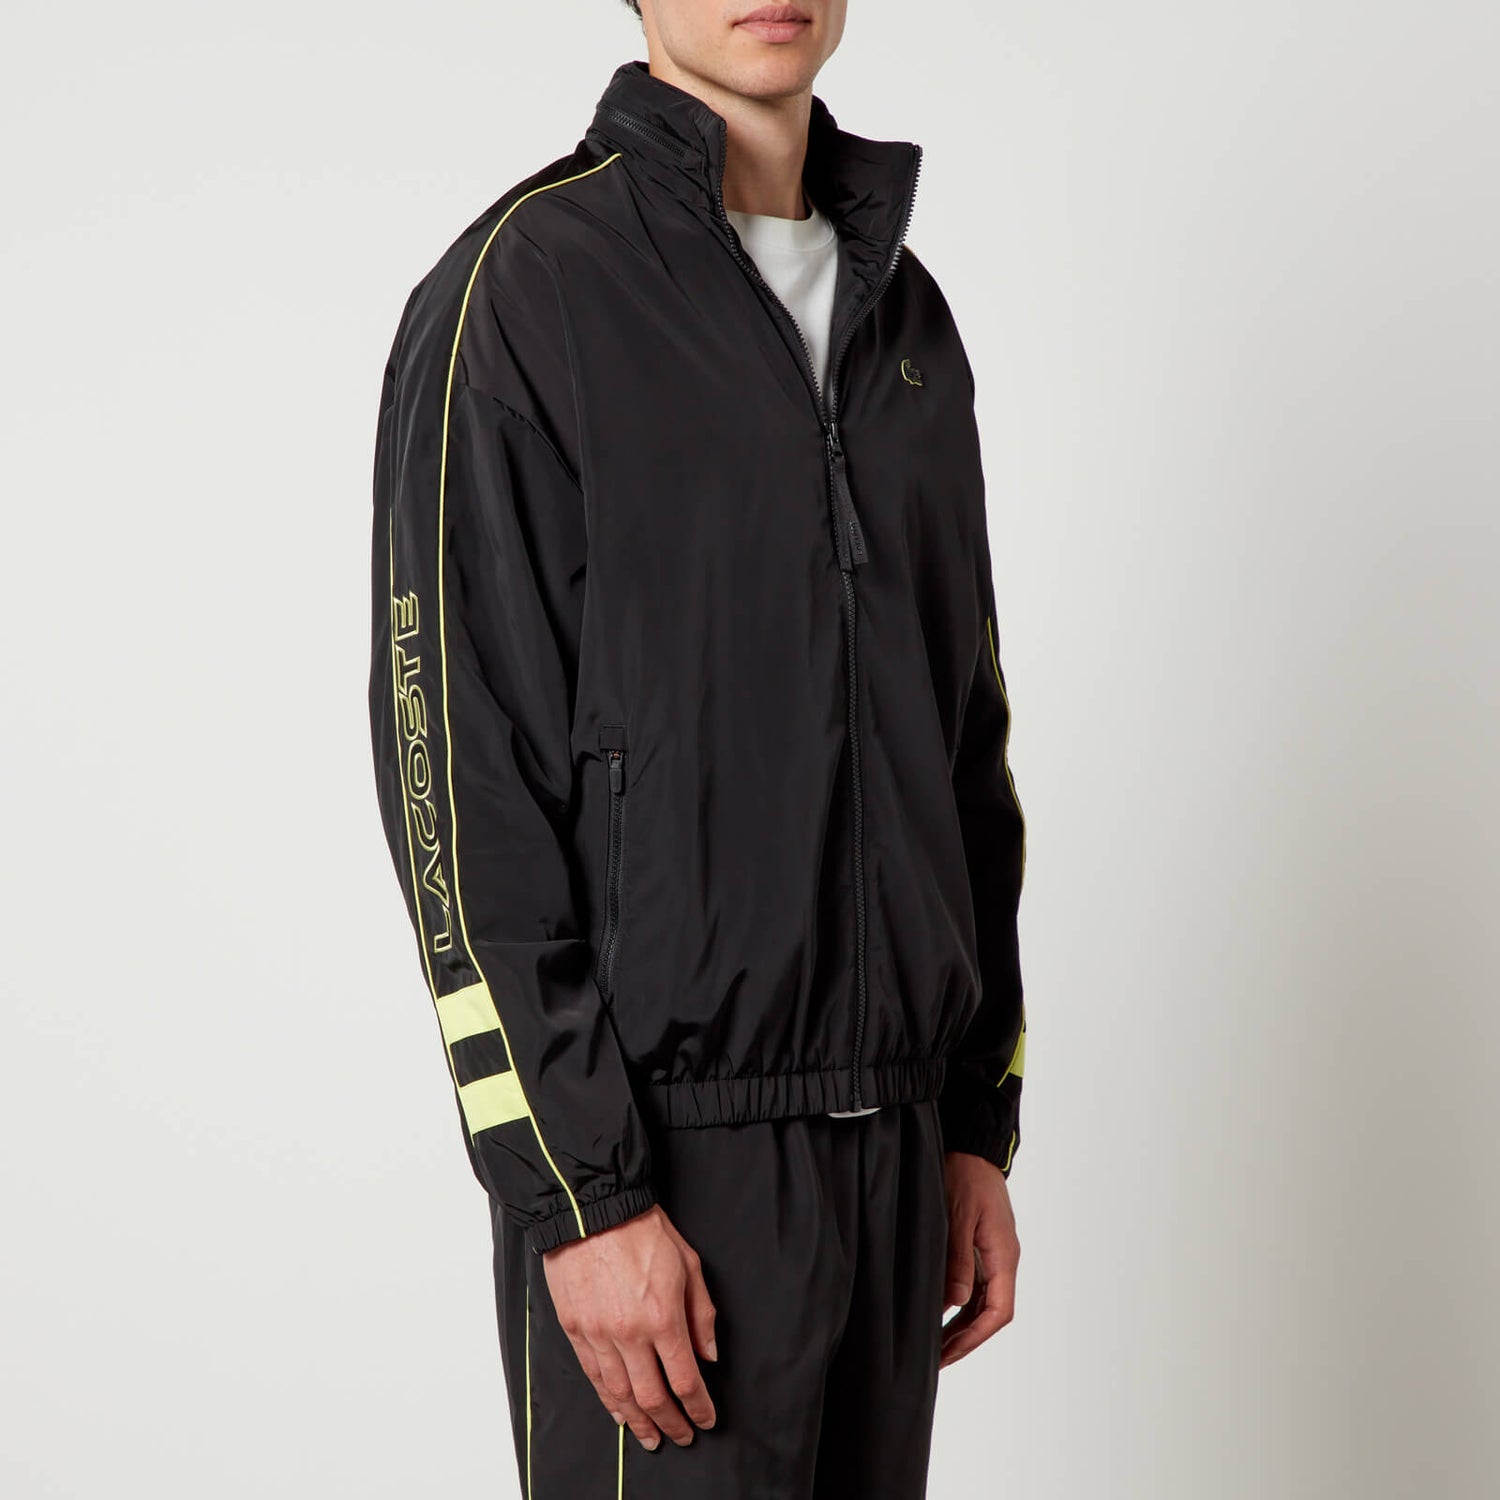 Lacoste Shell Tracksuit Top - S